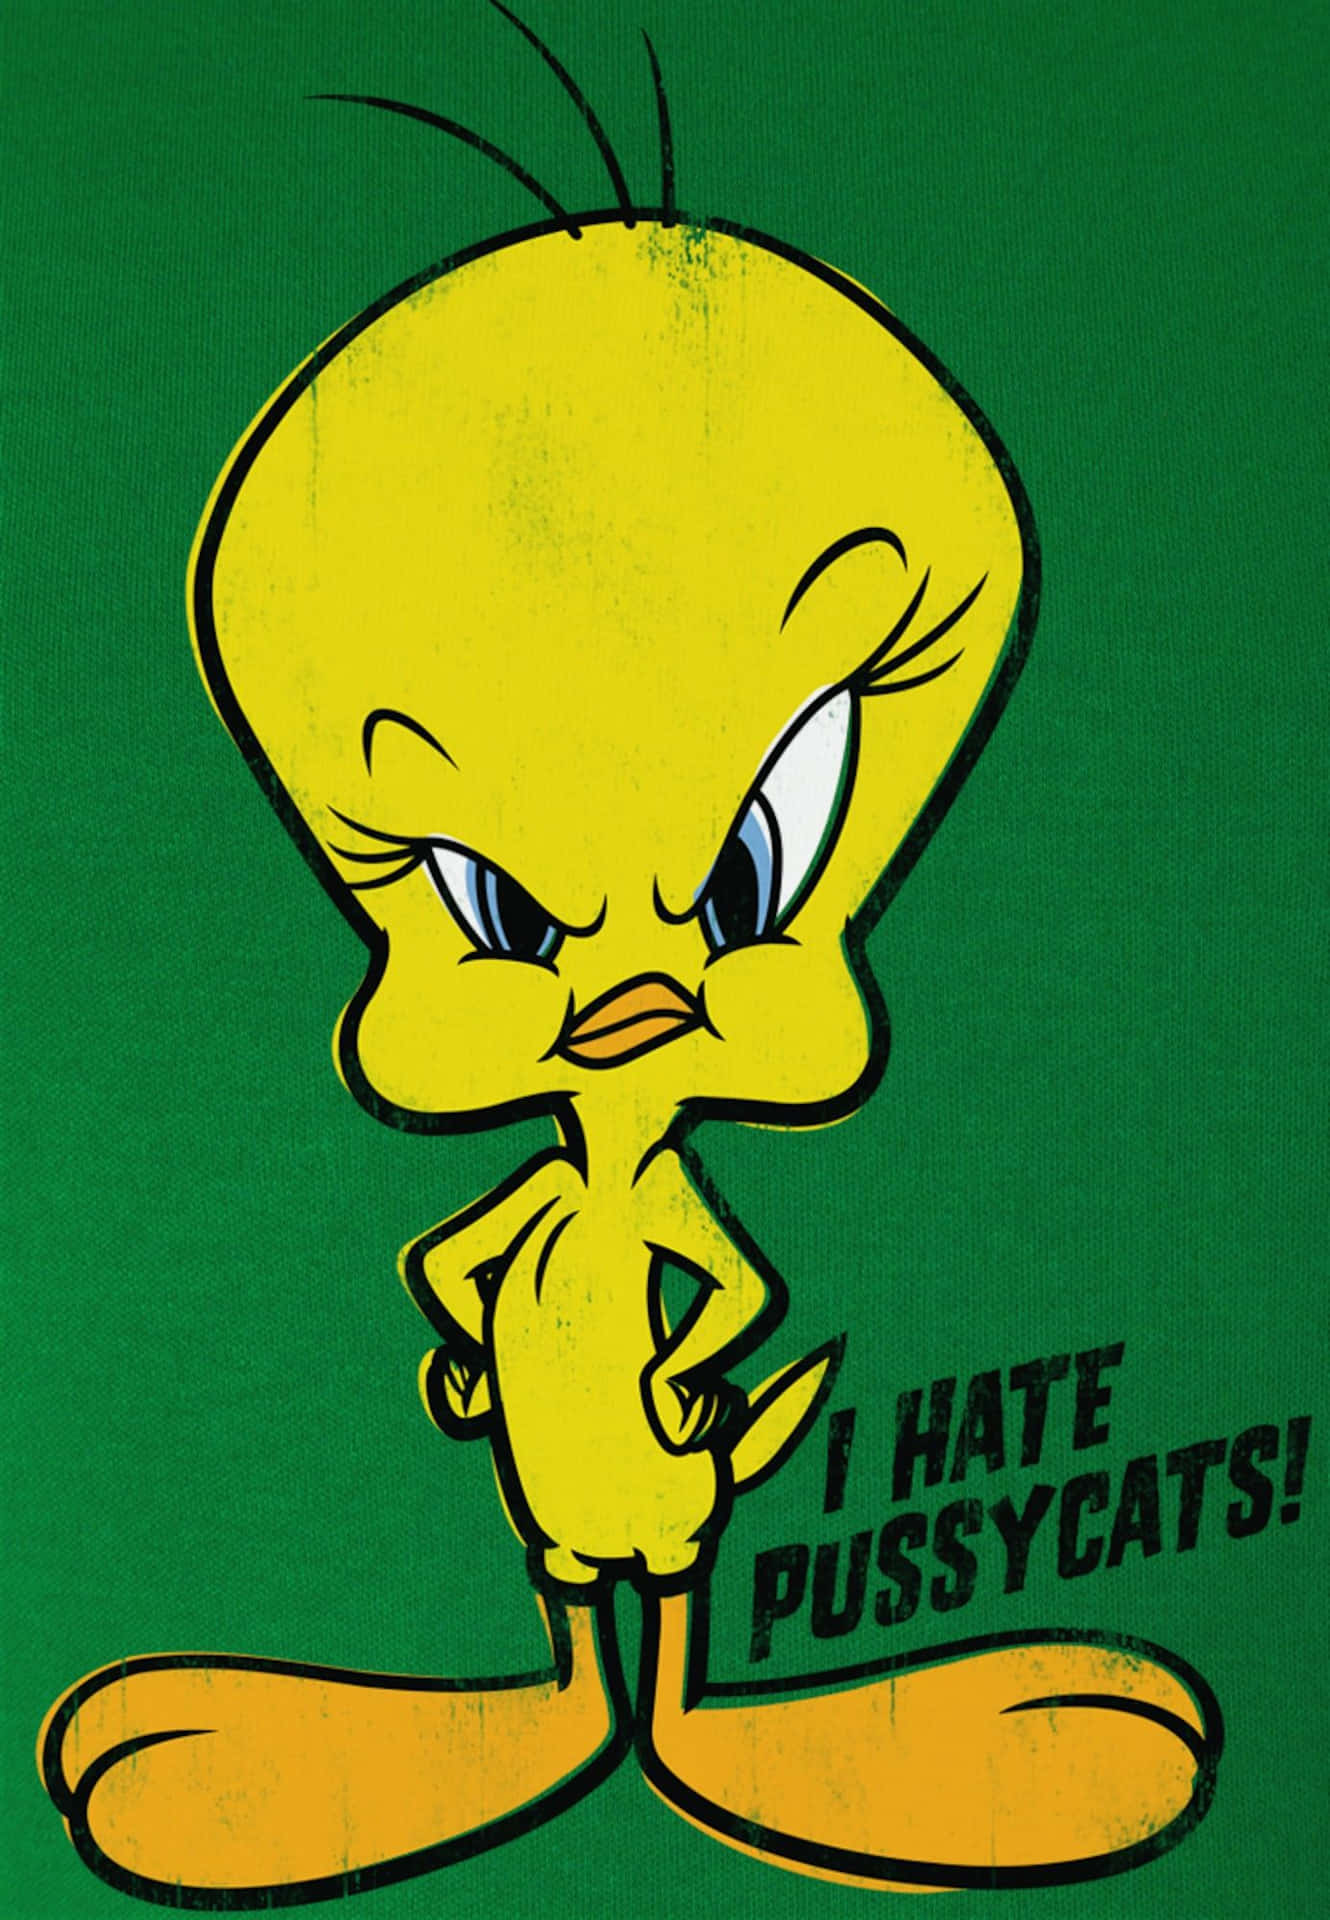 a cartoon bird with the words i hate pussycats